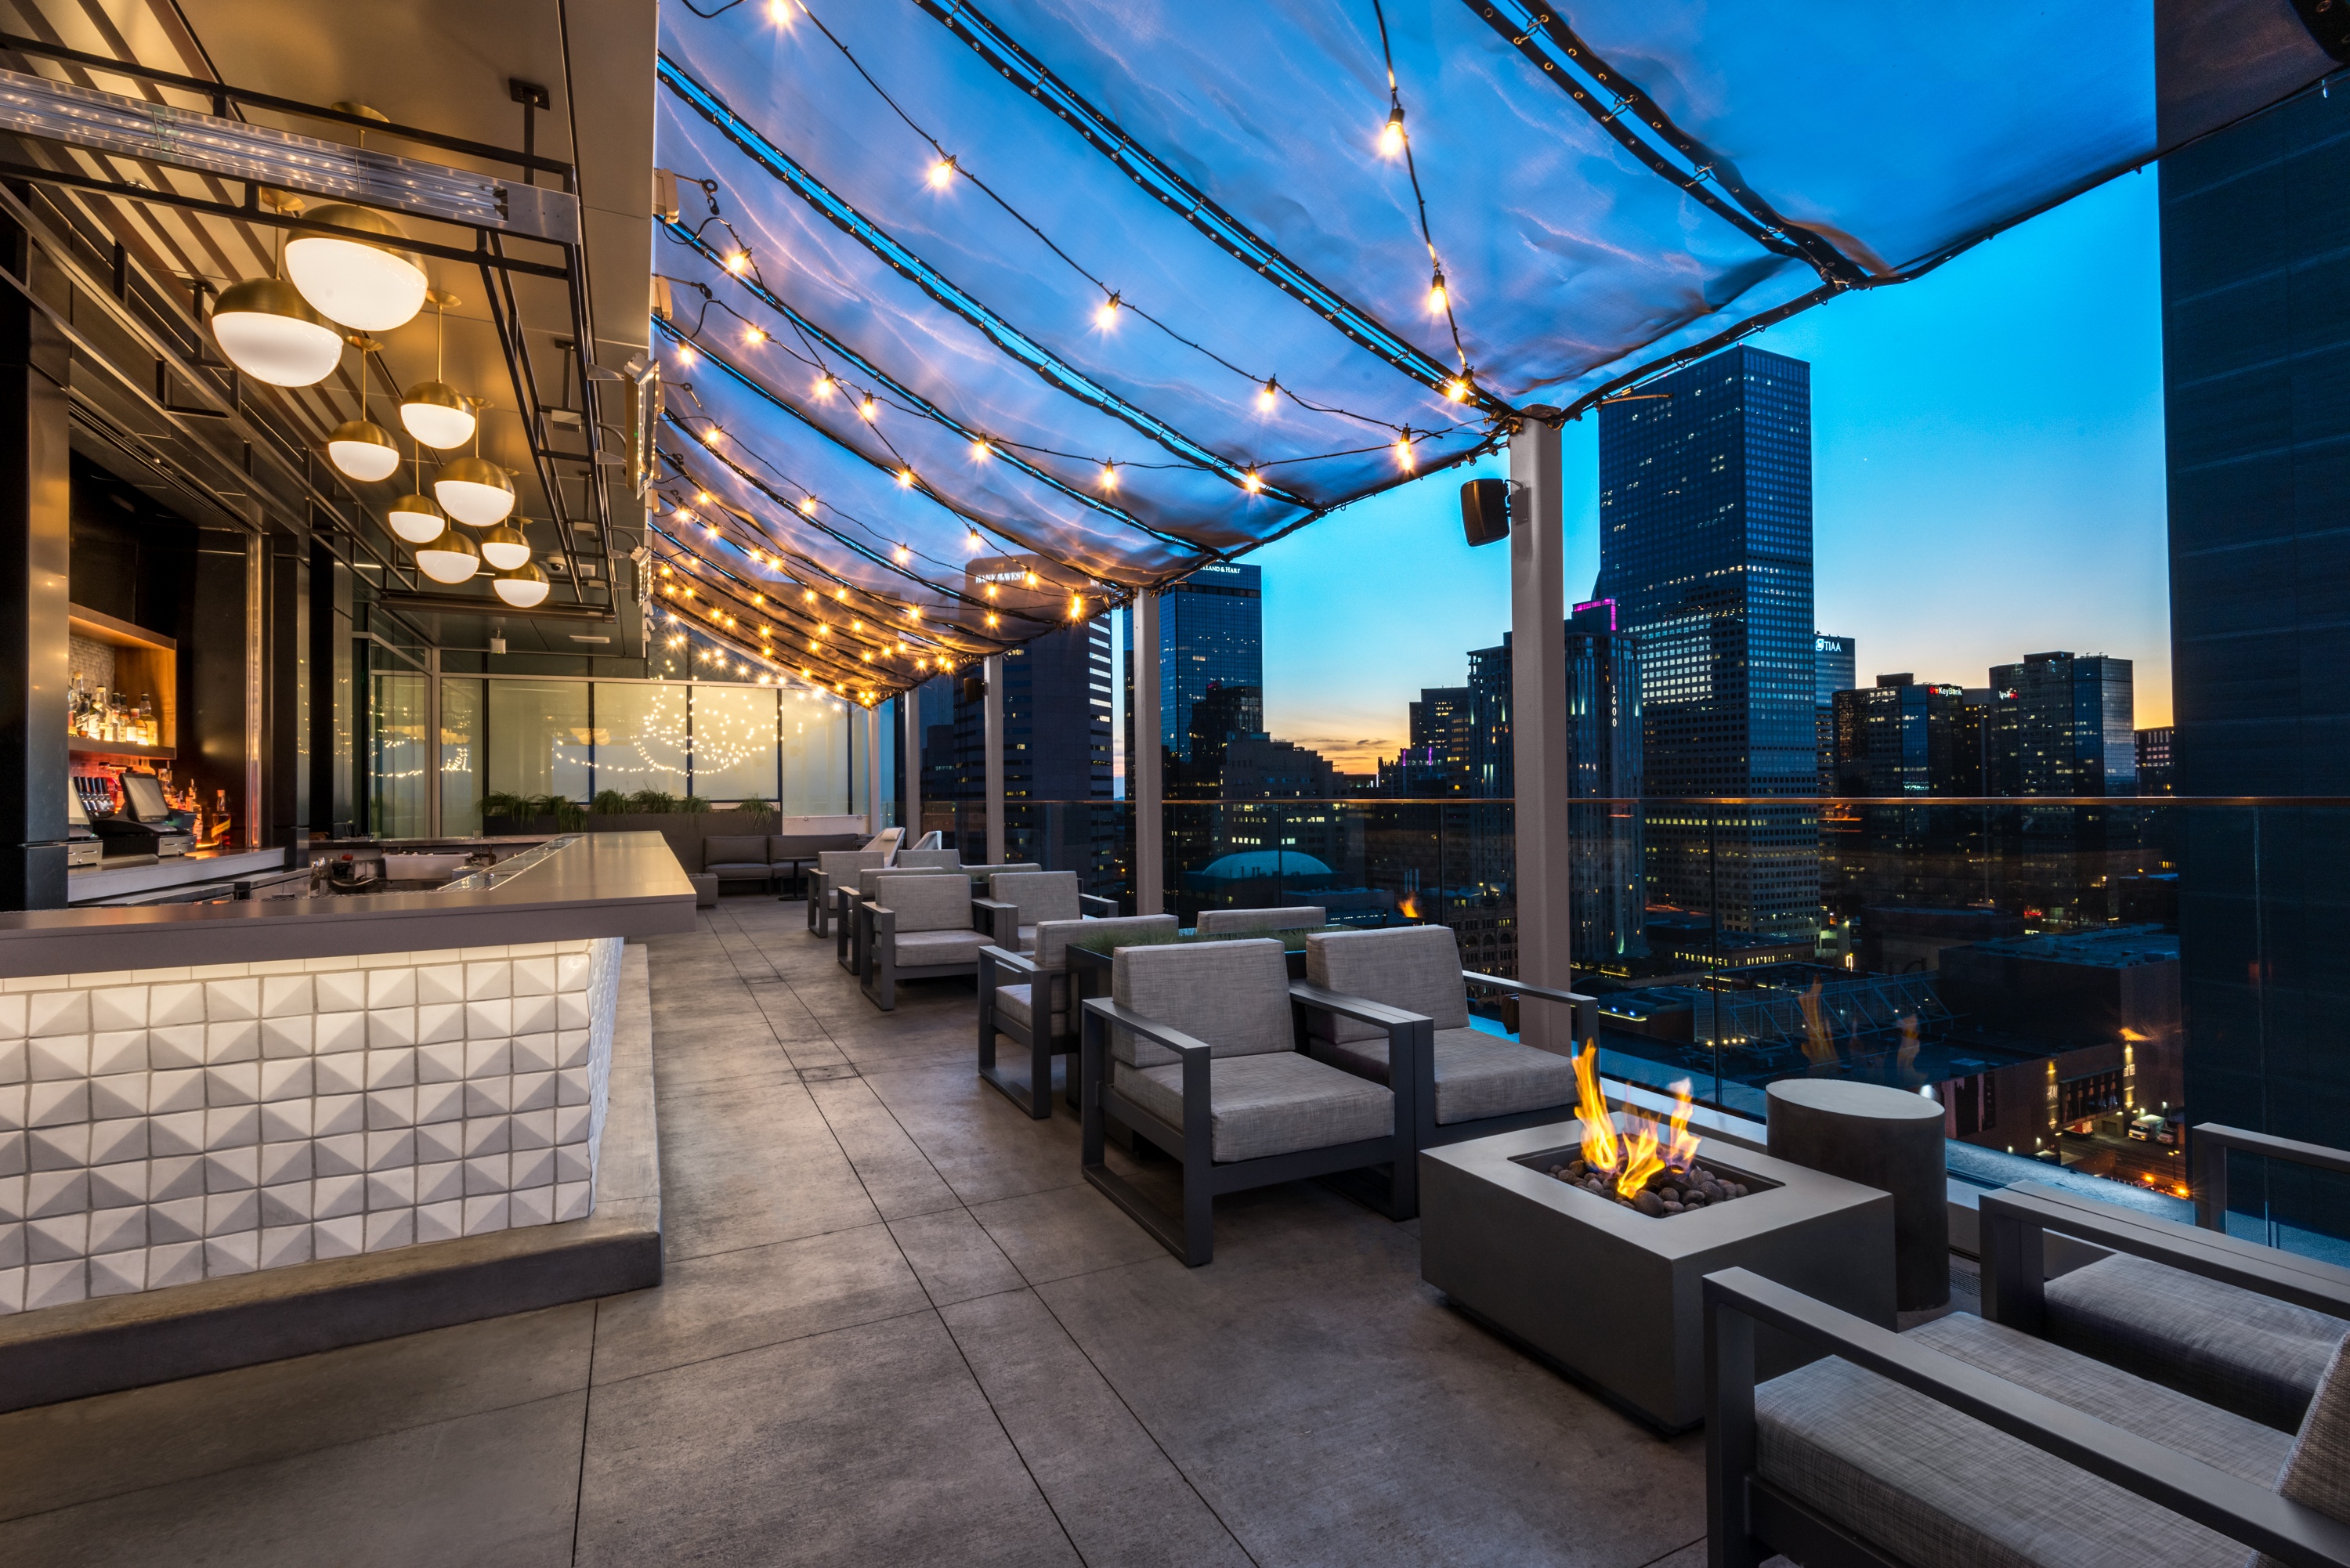 8 Spectacular Hotel Rooftops to Experience This Summer